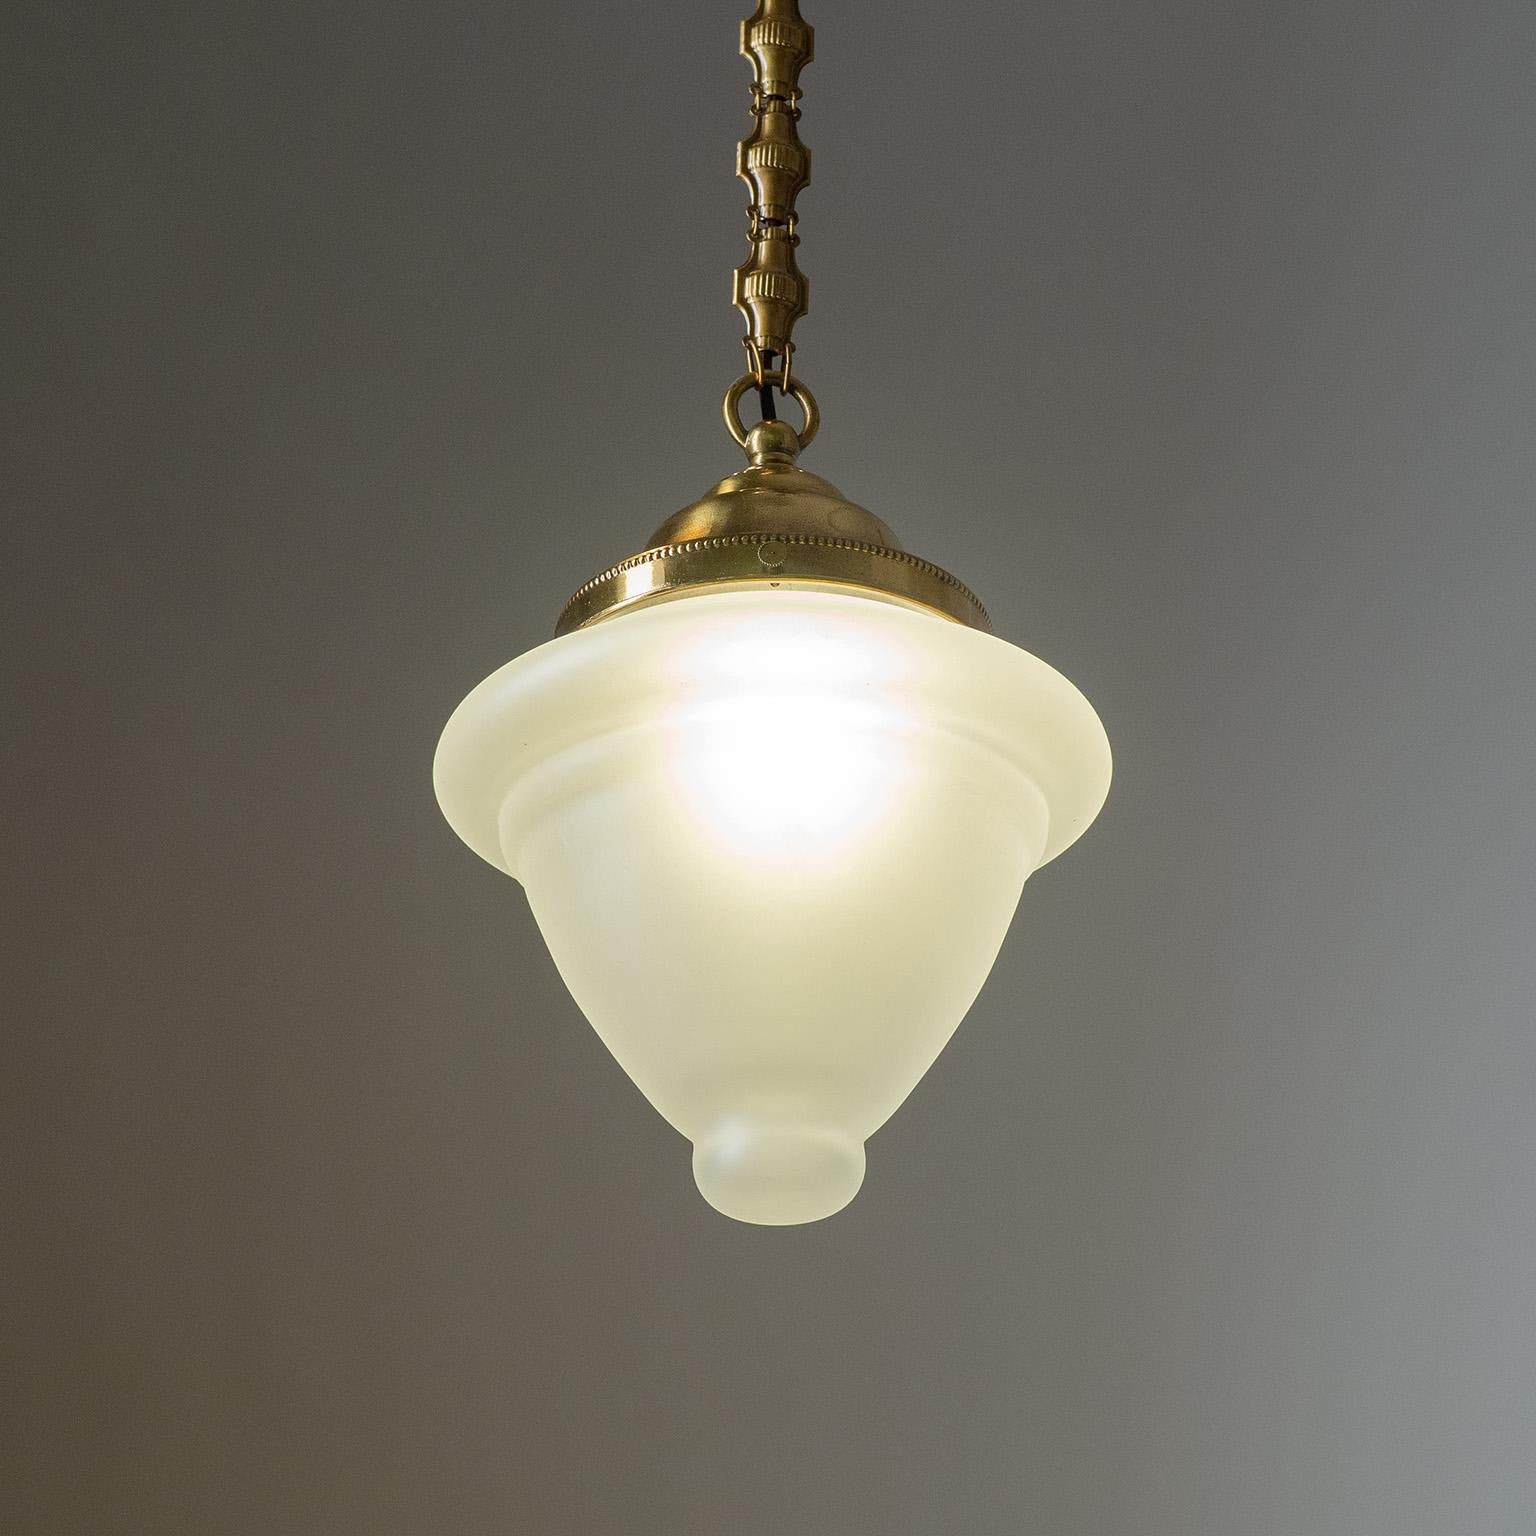 Austrian Brass Pendant With Satin Glass, 1920s For Sale